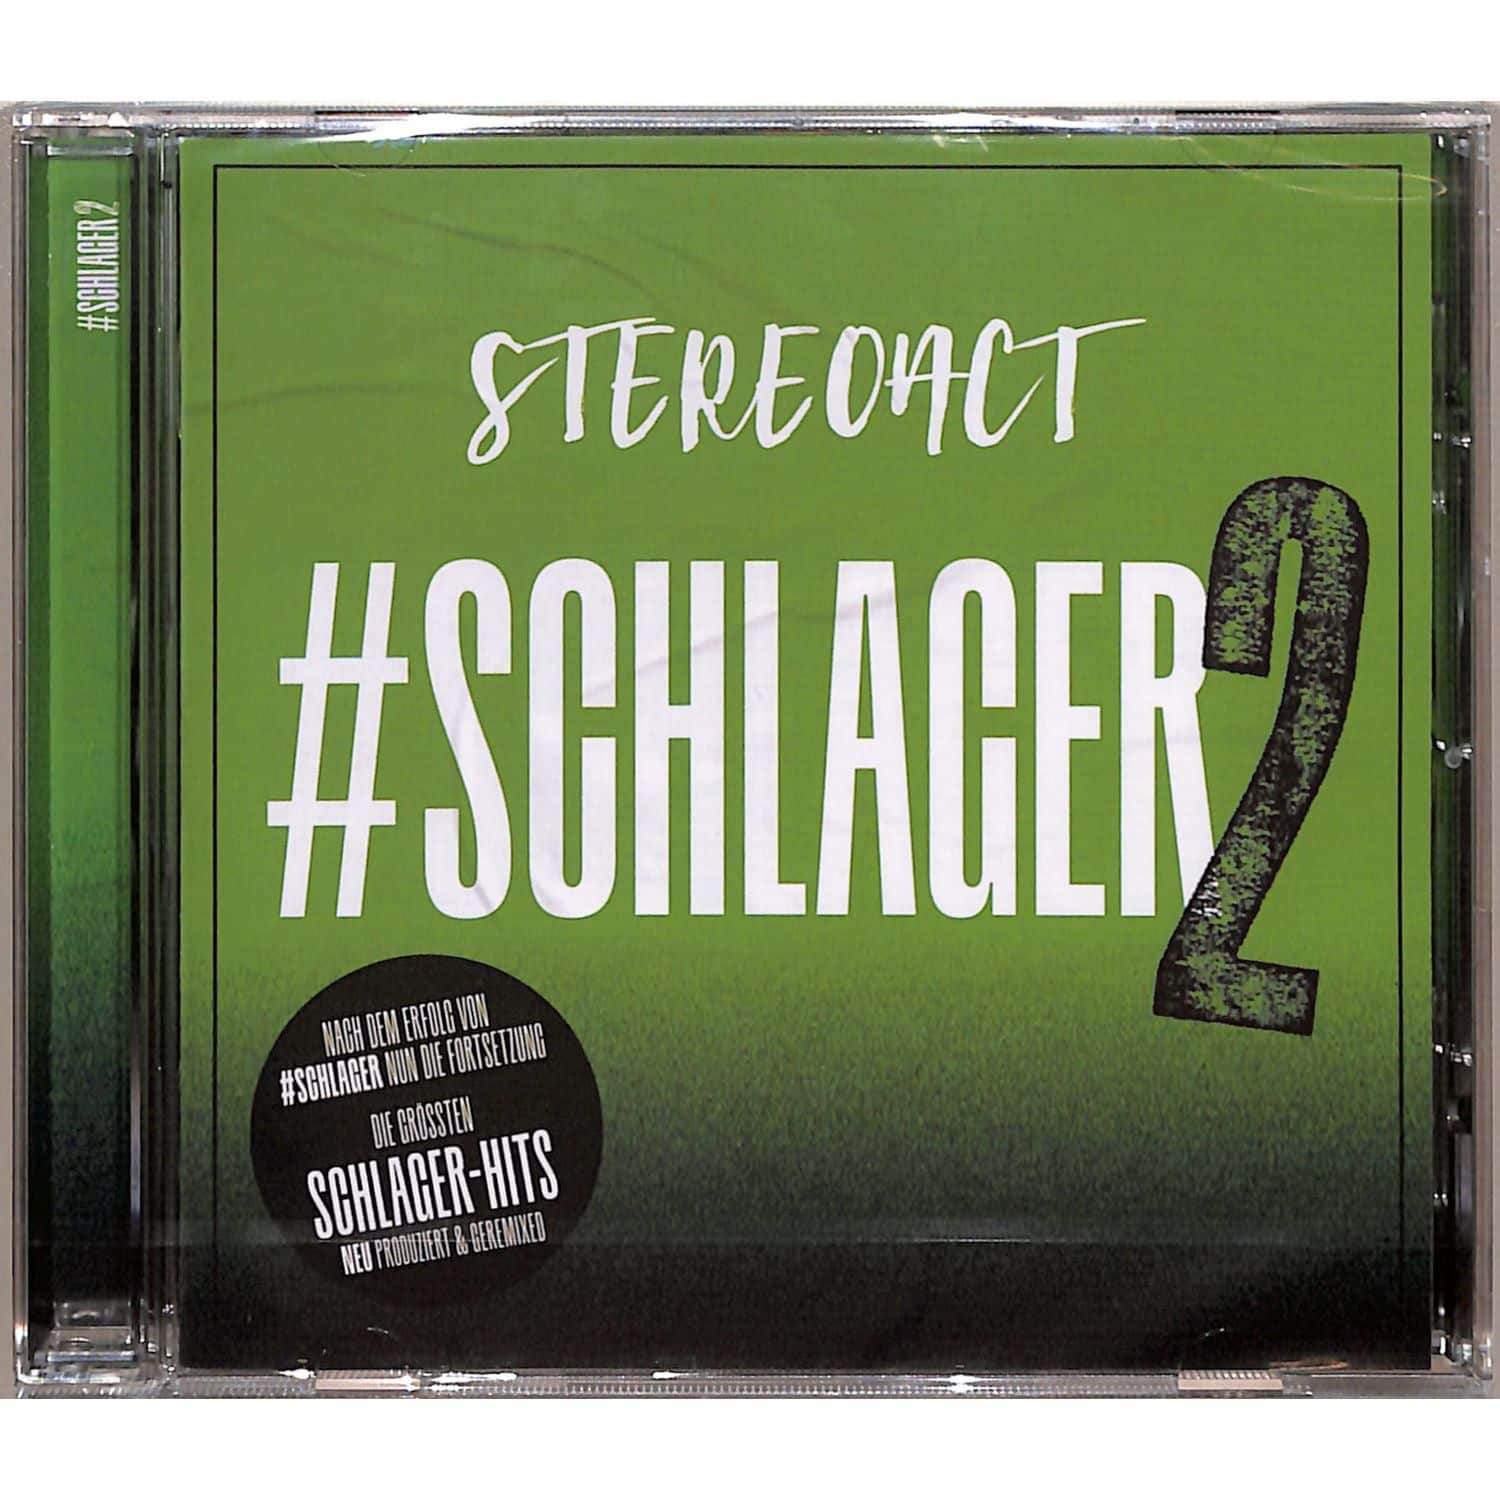 Stereoact - Hashtag SCHLAGER 2 